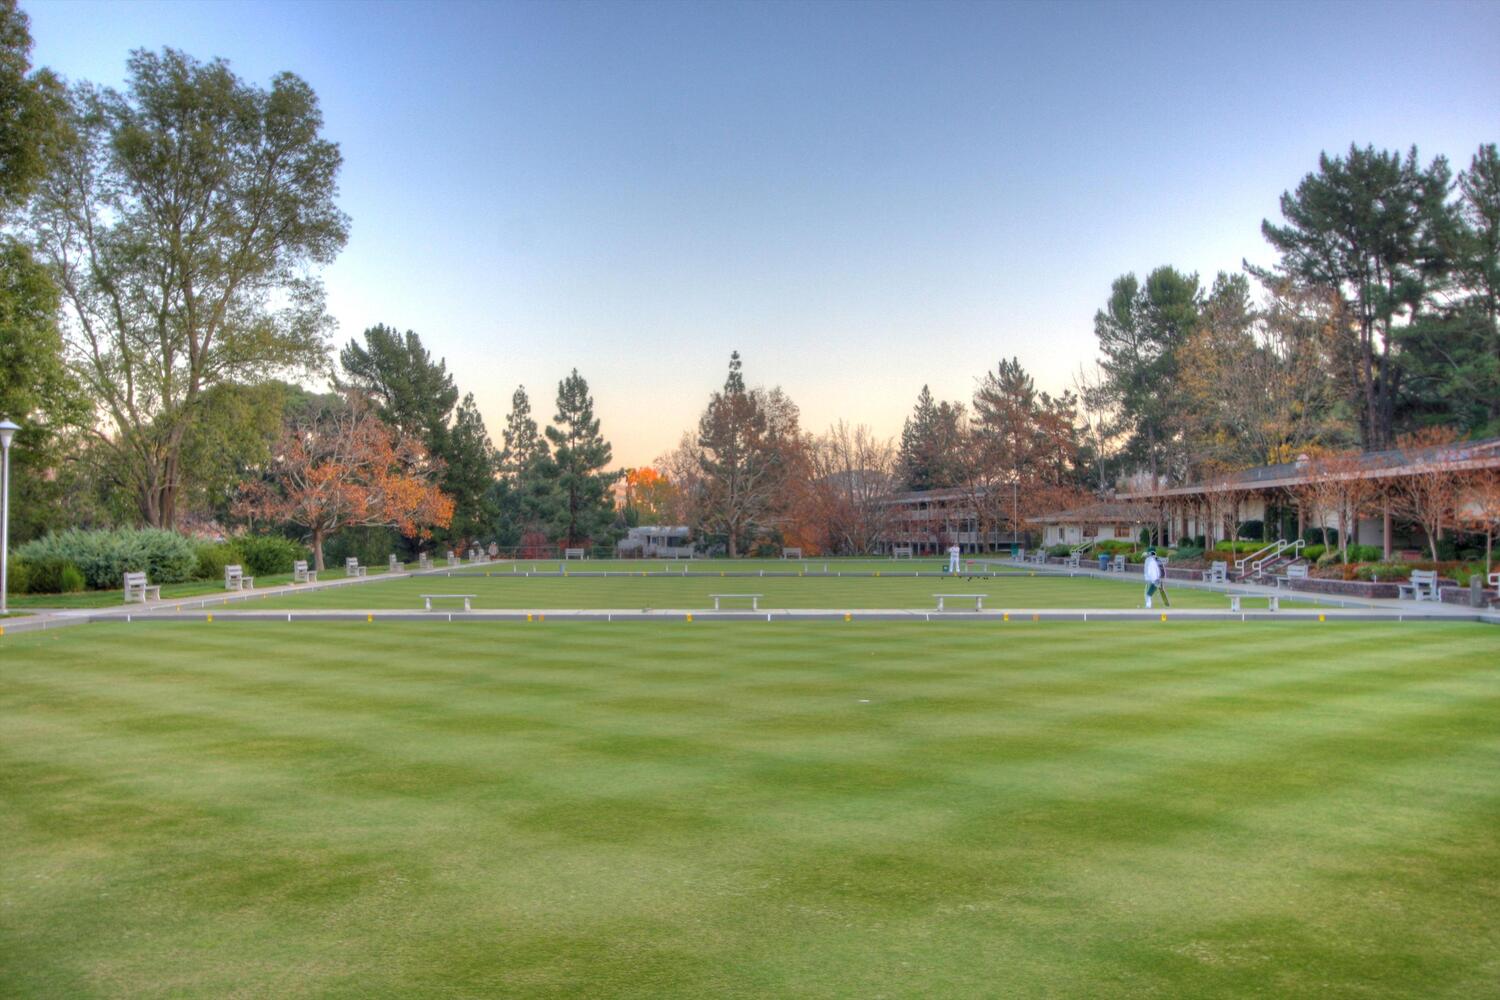 Lawn Bowling Greens at Hillside Clubhouse